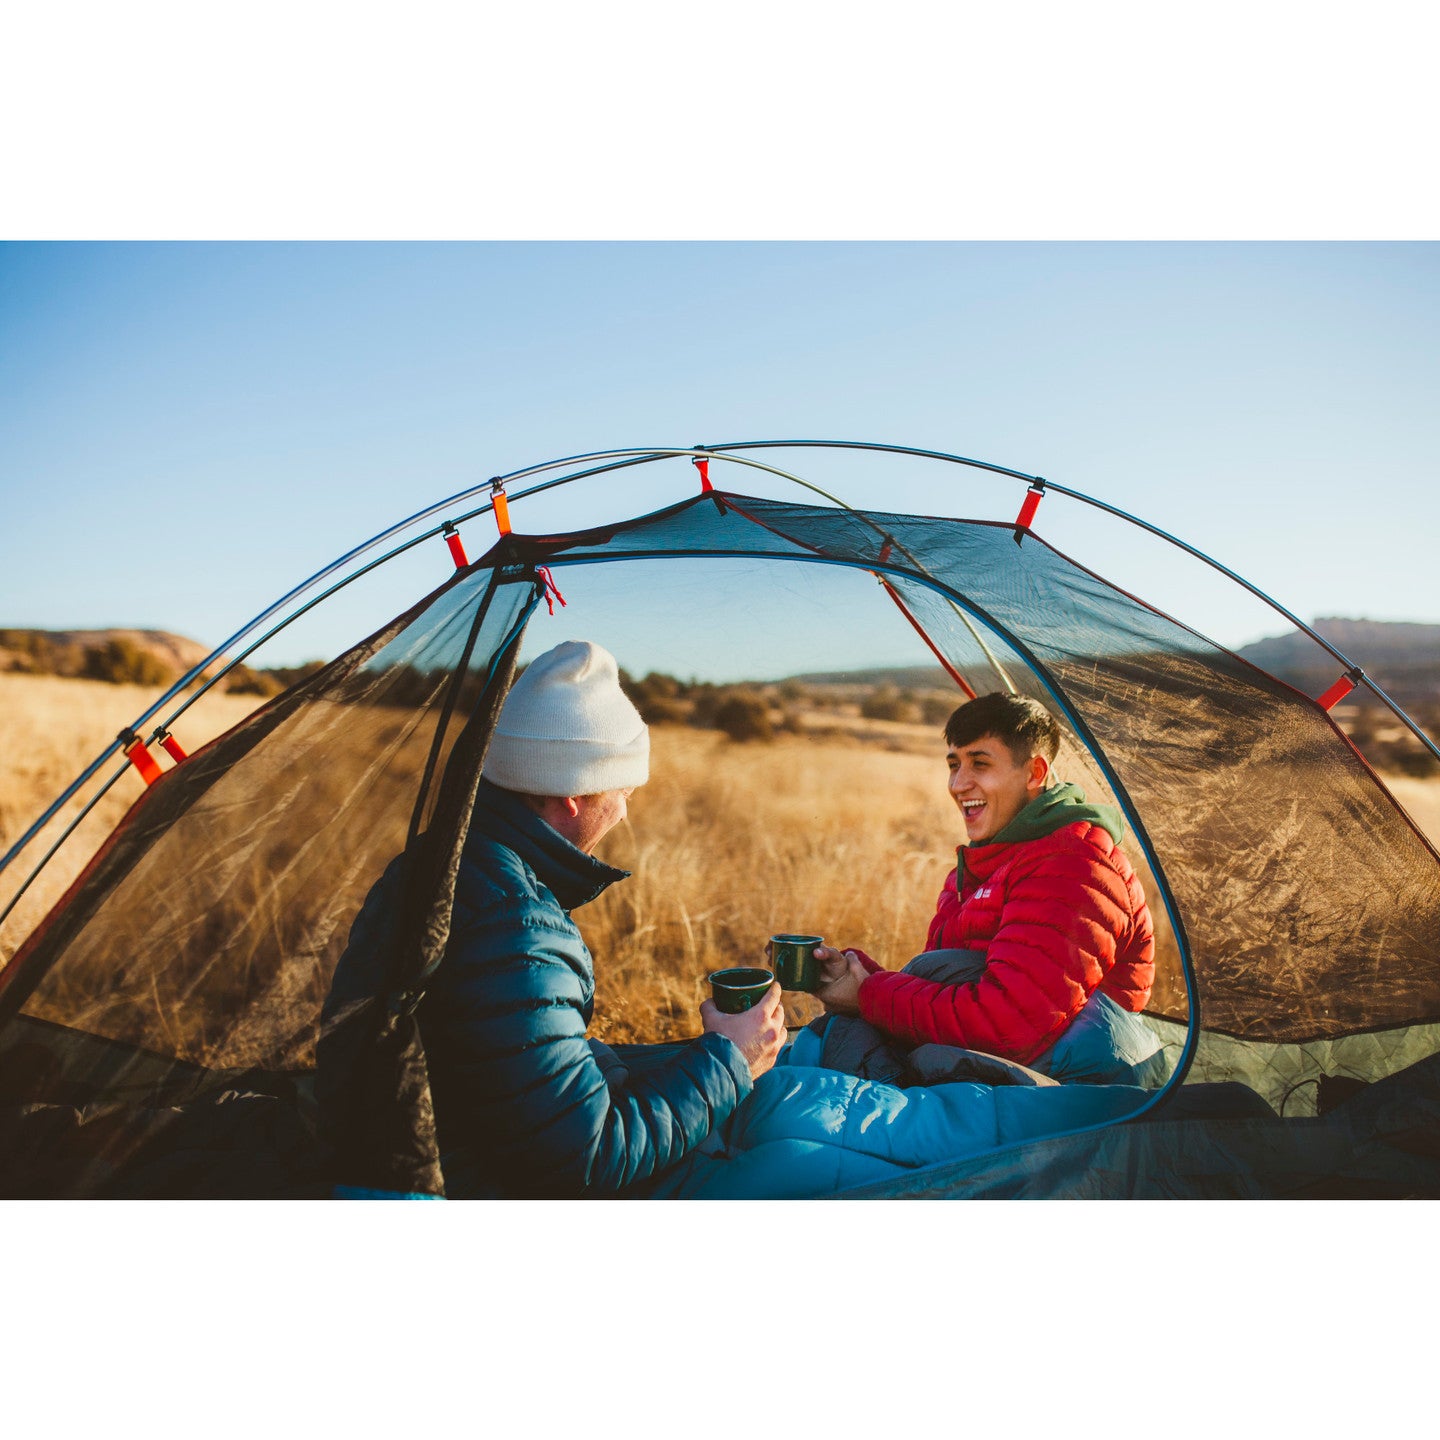 lifestyle image showing two people in a tent sitting up in their sleeping bags